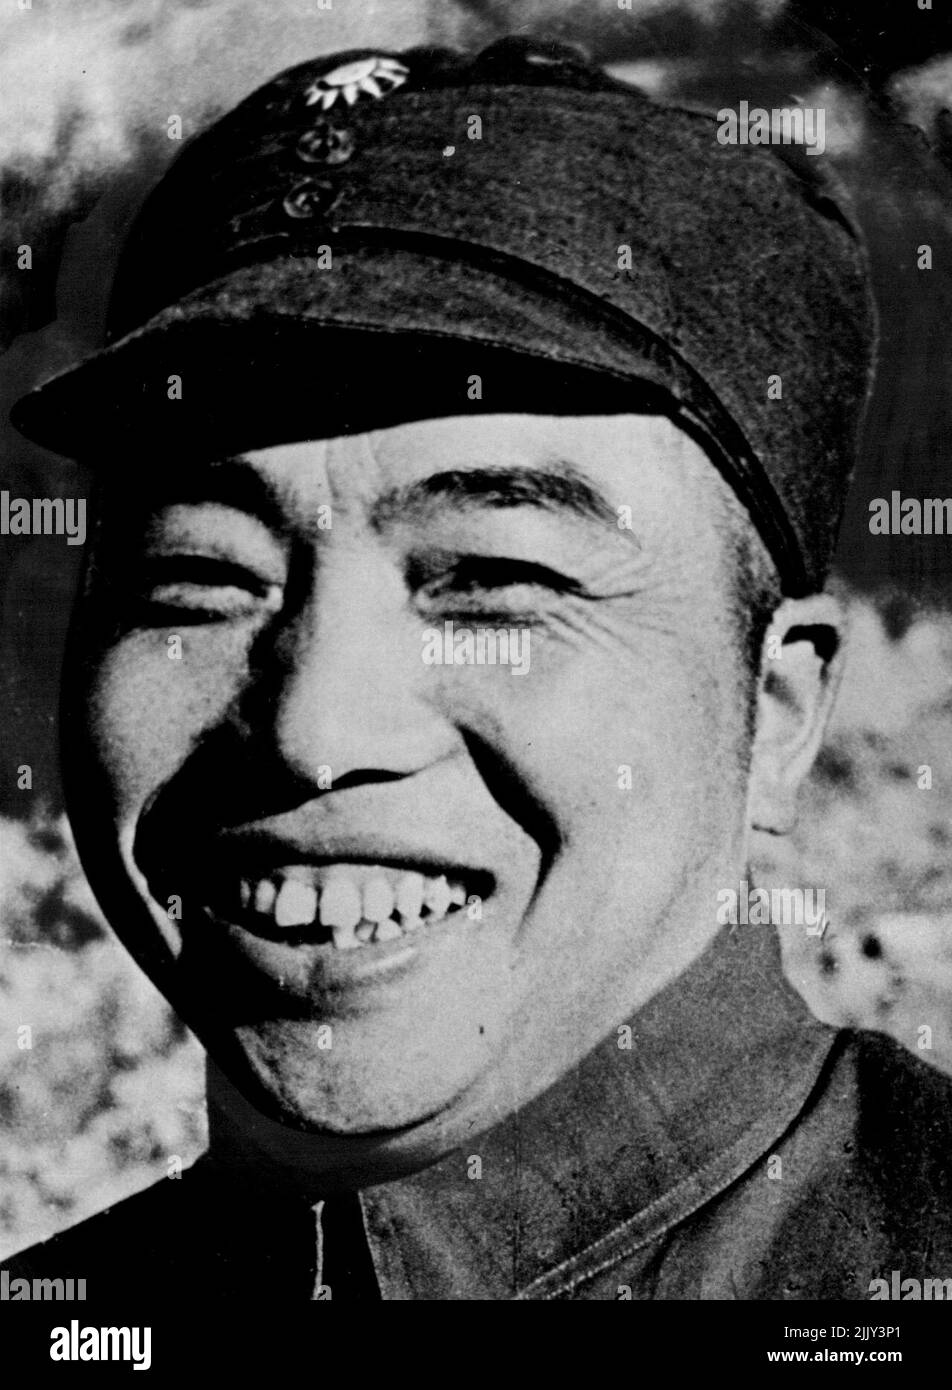 To Take Part in Peace Talks. General Peng Teh-Huai, Commander of the 'Chinese Volunteers' in Korea. He is one of the commanders who have agreed to meet United Nations representatives for conducting talks on the possibility of the cessation of military activities in Korea. July 10, 1951. (Photo by Paul Popper). Stock Photo